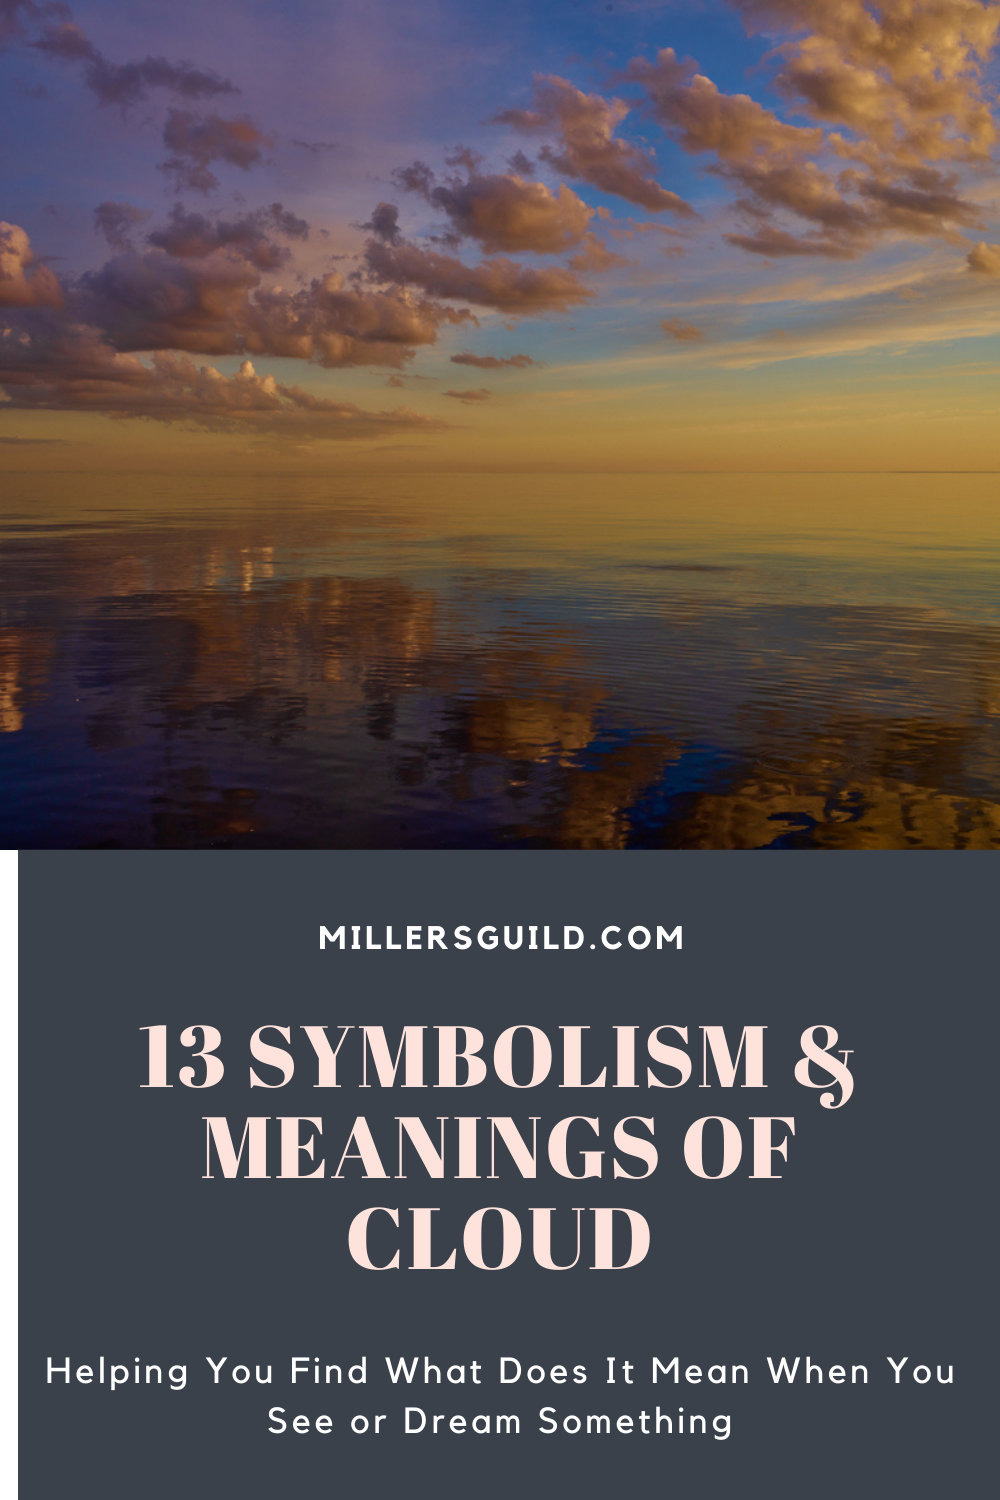 13 Symbolism & Meanings of Cloud 2